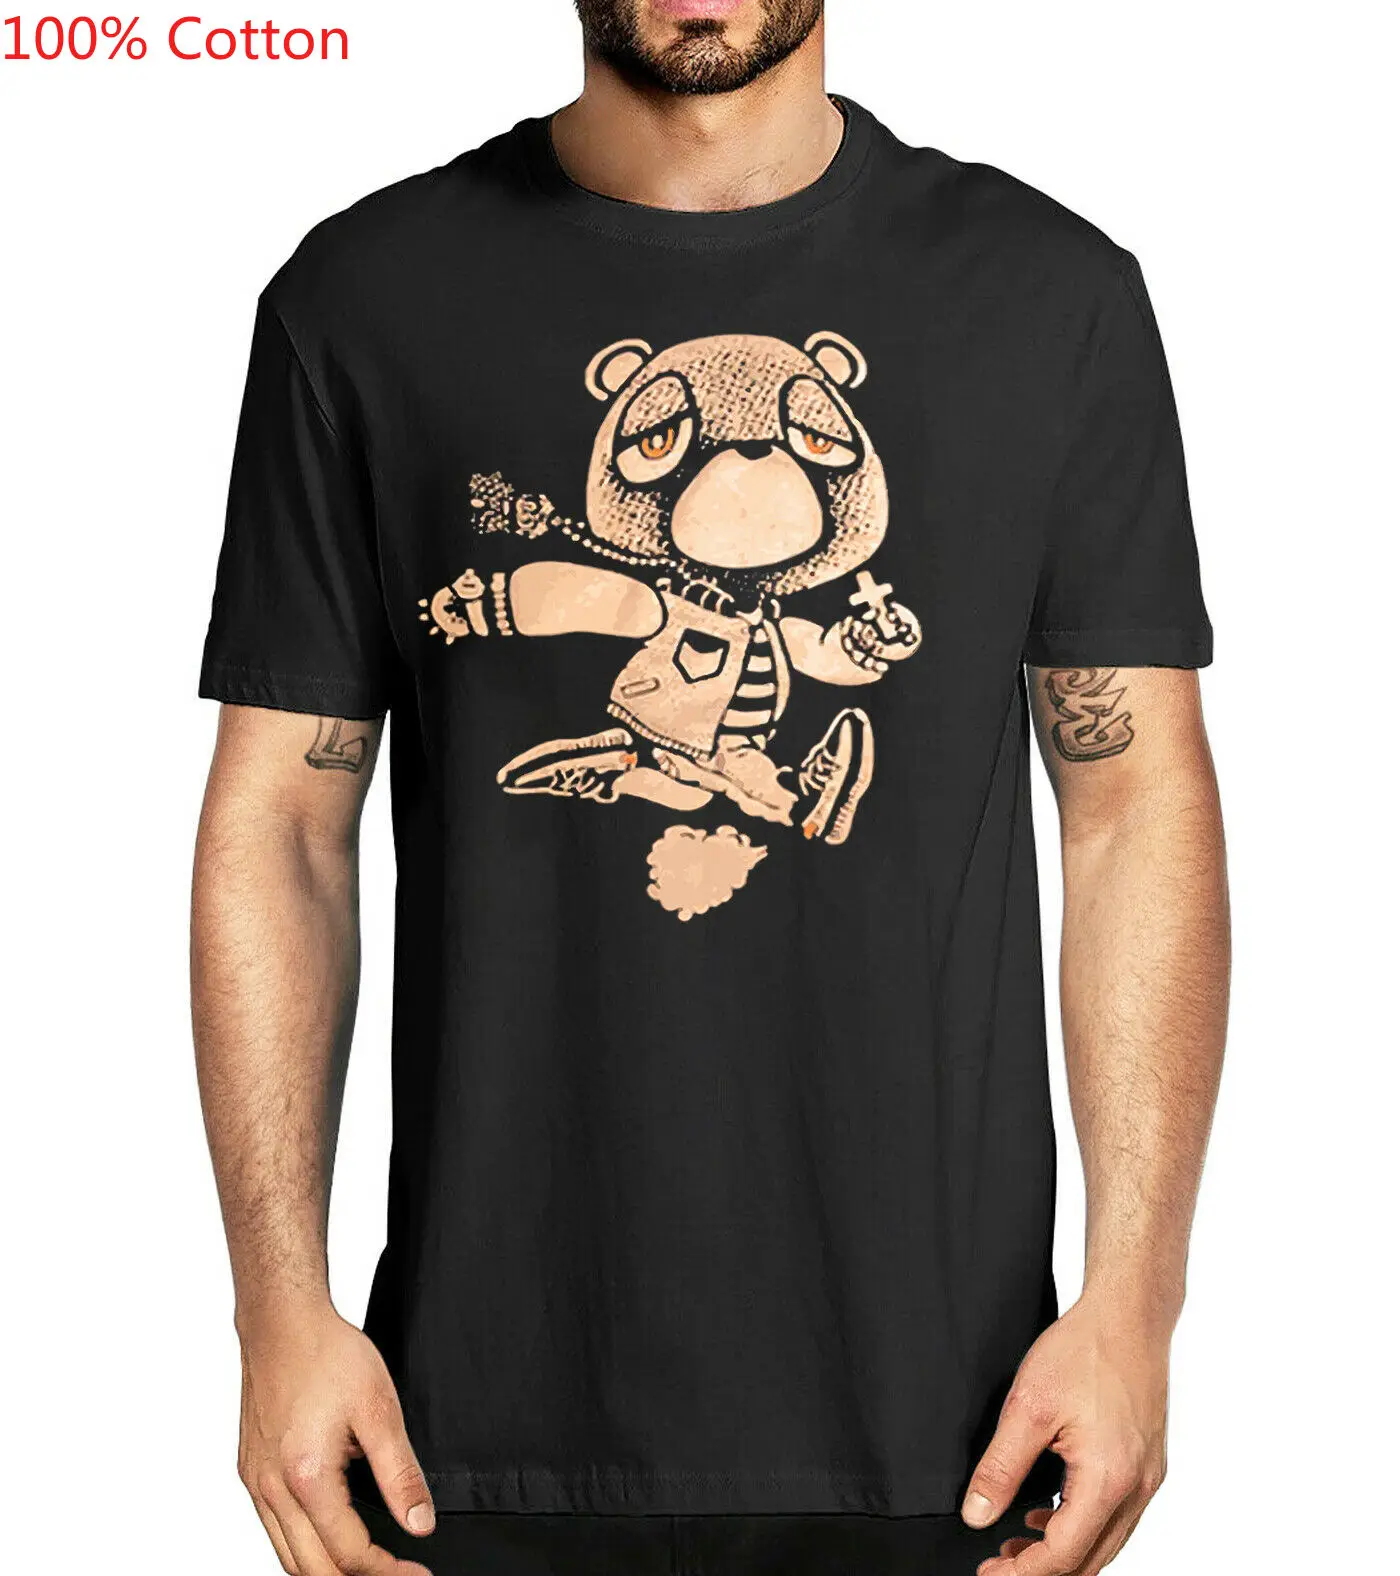 

Tan Kanye West Bear Late for Church crewneck for Yeezy Boost 350 V2O - Collar Four - Season Printed Cotton T-shirt Short Sleeves